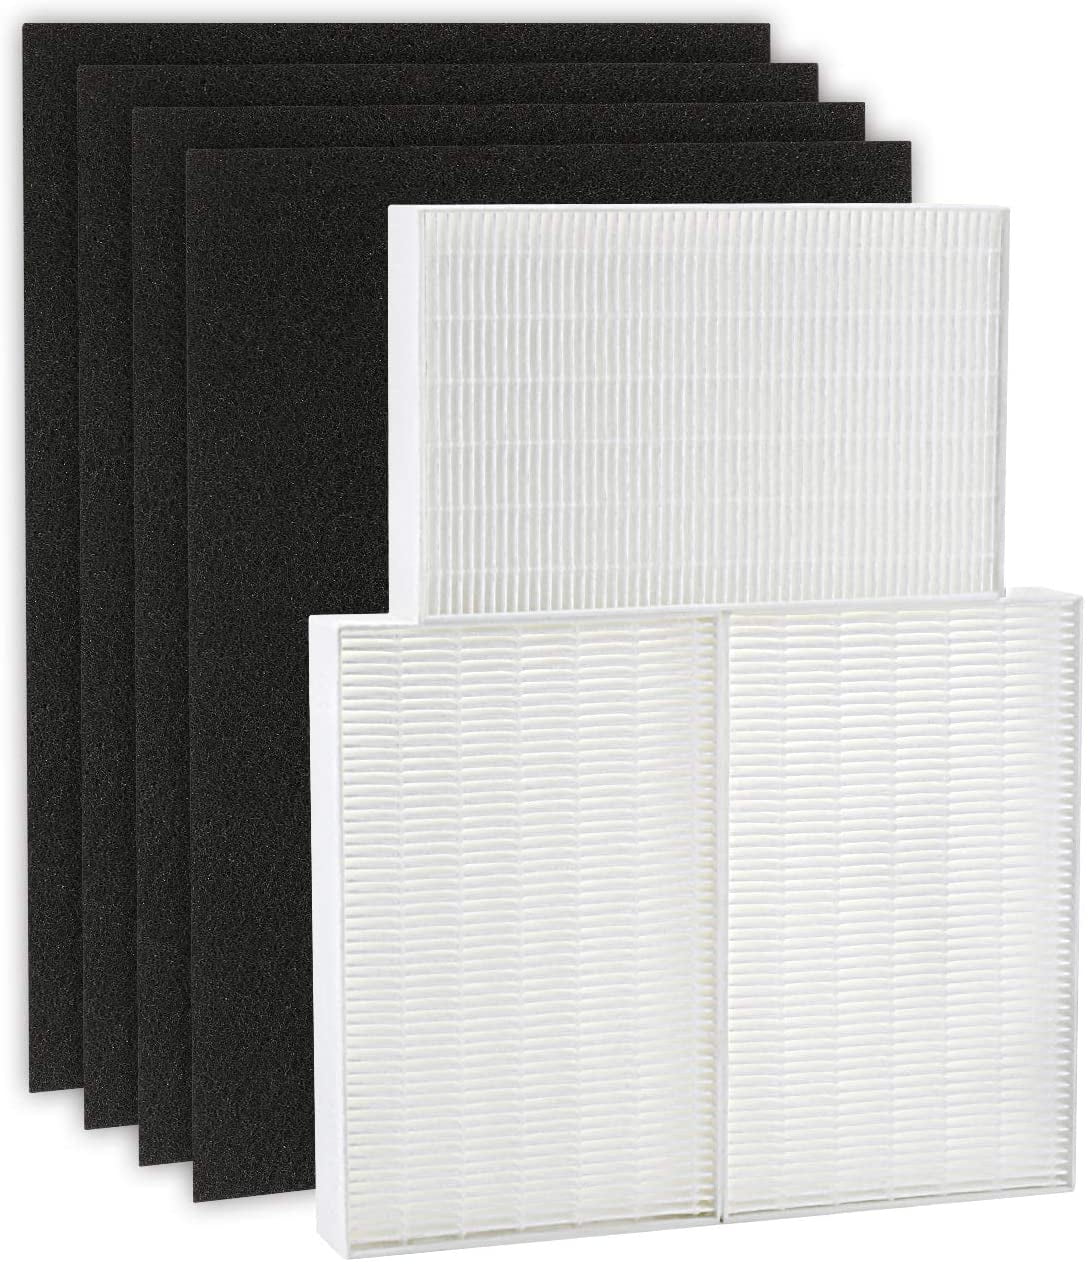 4 Set HEPA Filter R & Carbon Pre Filter For Honeywell HPA300 Air Purifier HRF-R3 